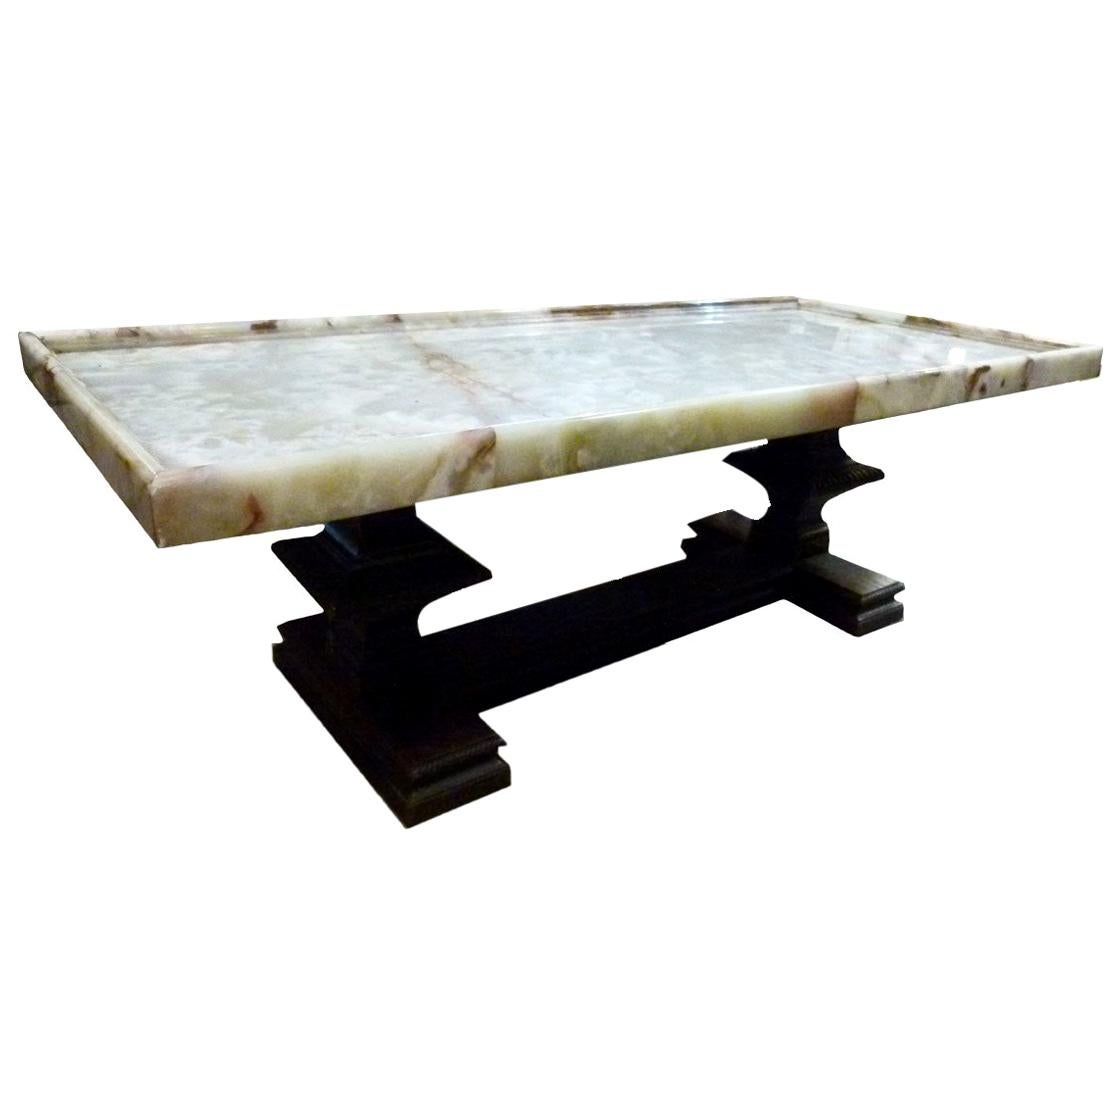 20th Century Center Table in Onyx Stone Top and Wood Base. Spain